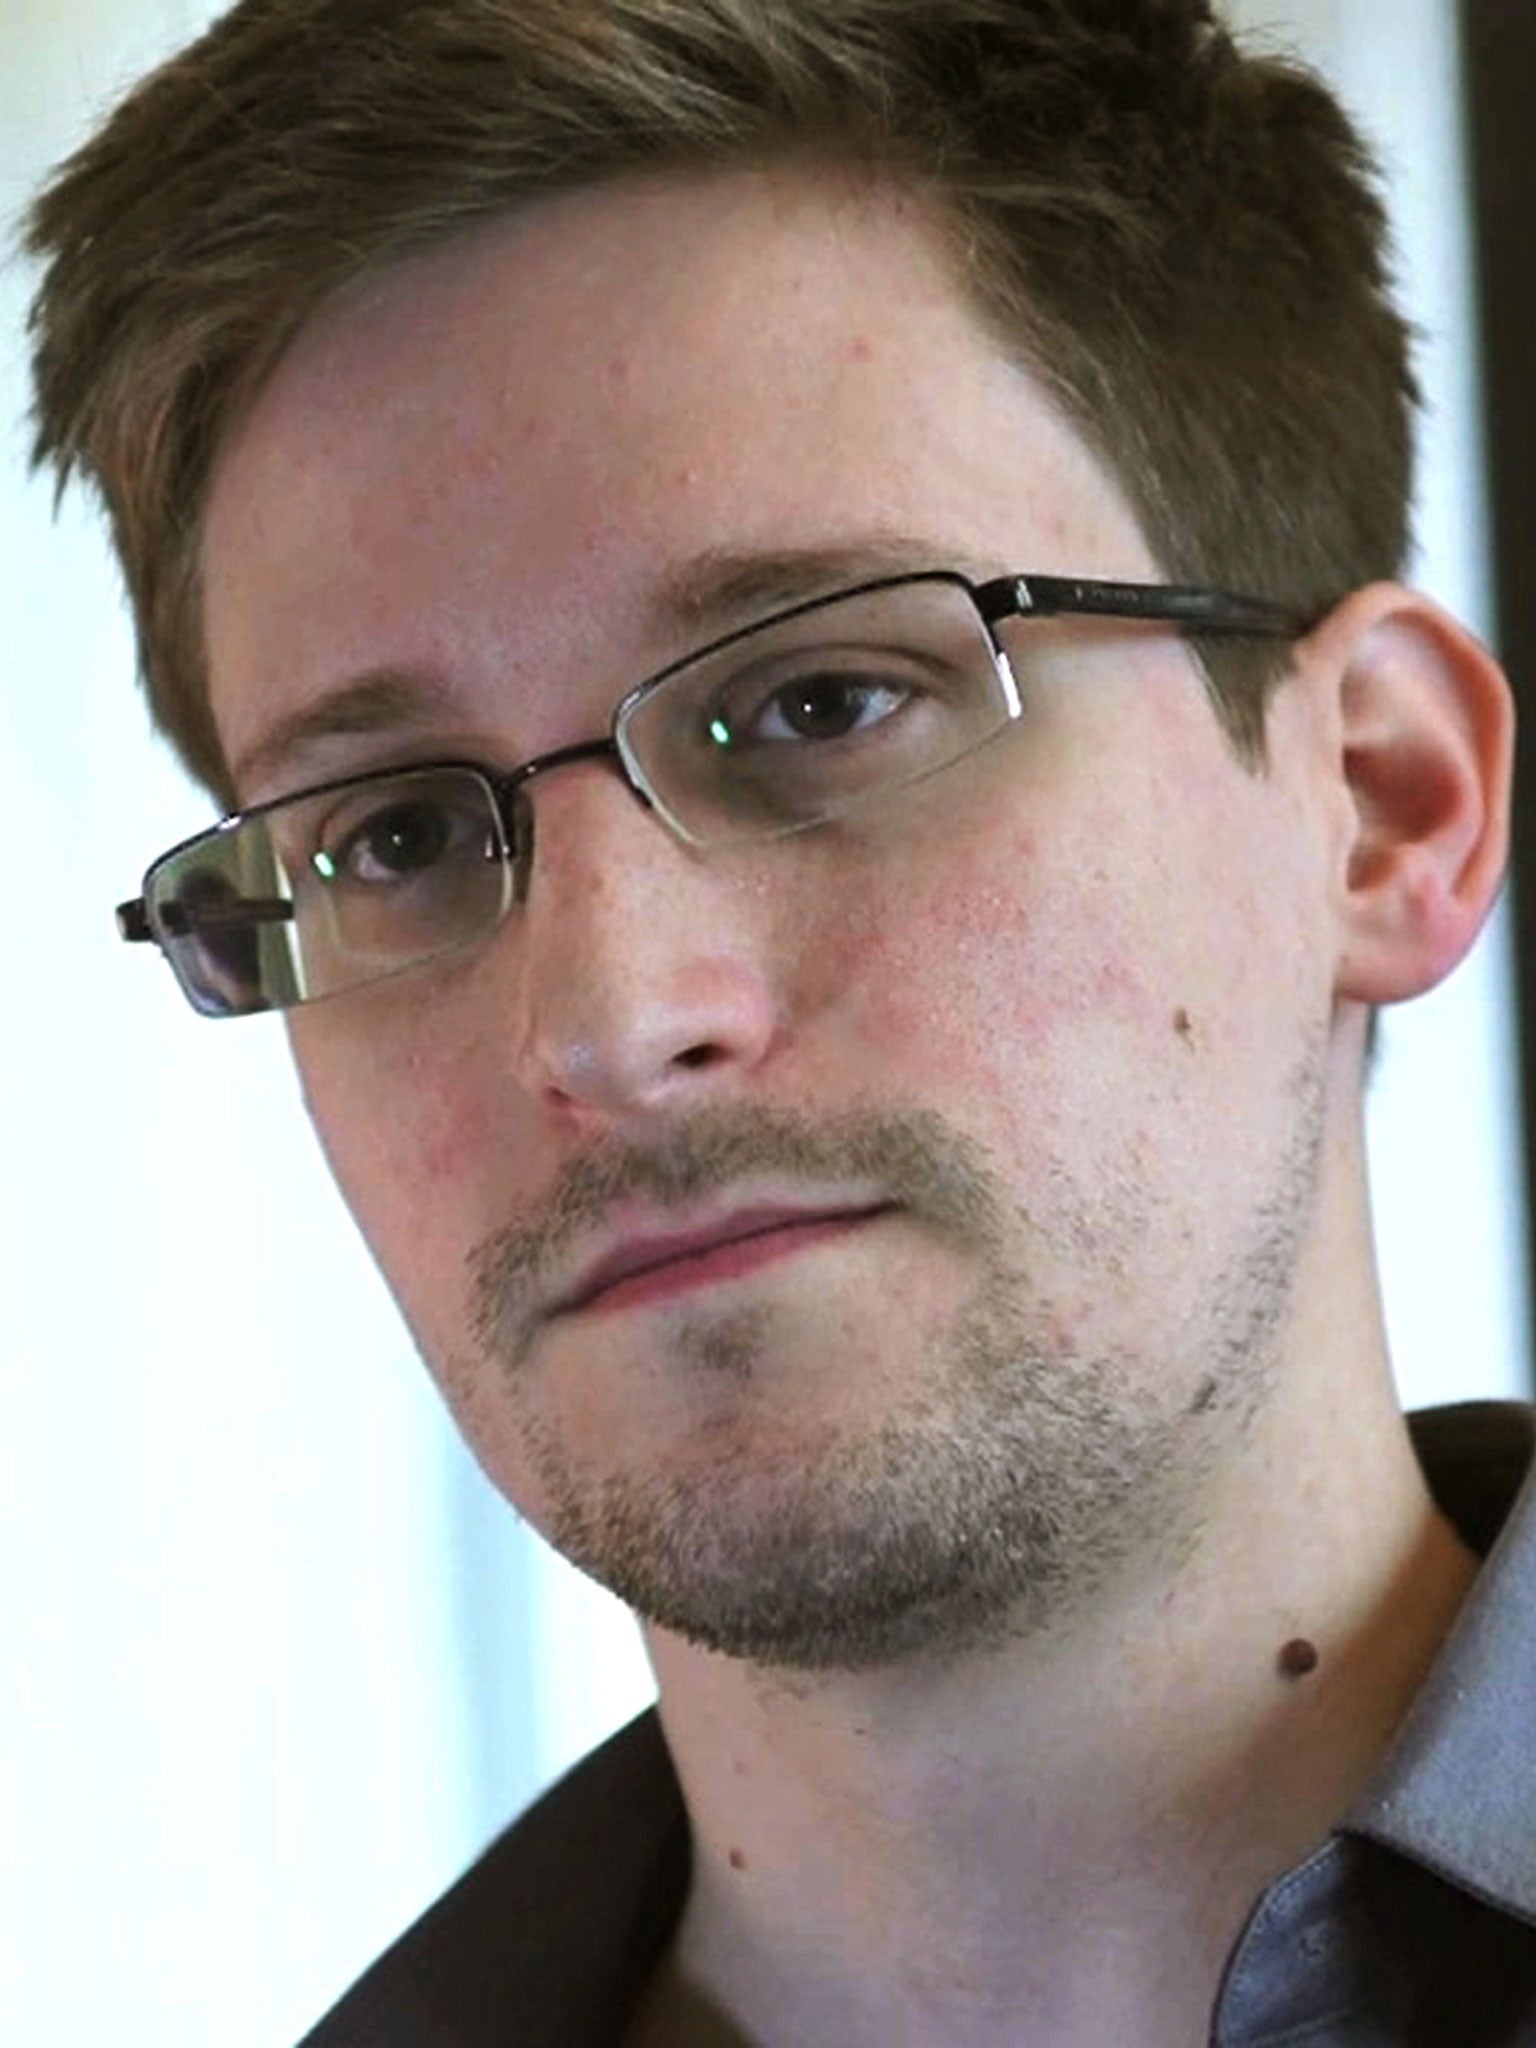 The fugitive US whistleblower Edward Snowden alleged yesterday that the National Security Agency was 'in bed together' with German intelligence